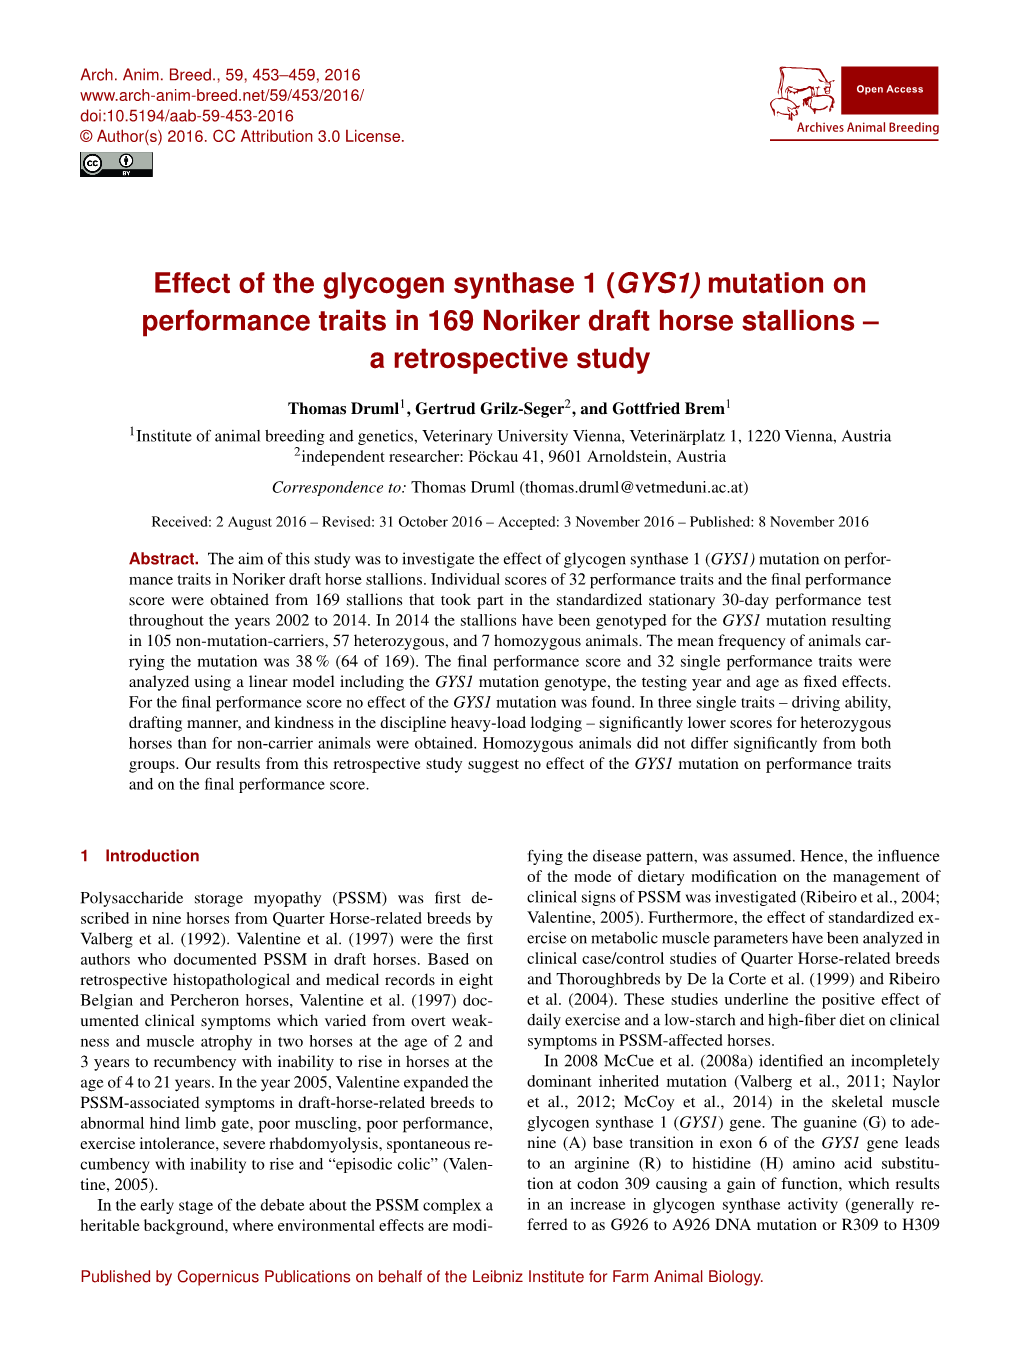 Effect of the Glycogen Synthase 1 (GYS1) Mutation on Performance Traits in 169 Noriker Draft Horse Stallions–A Retrospective Study